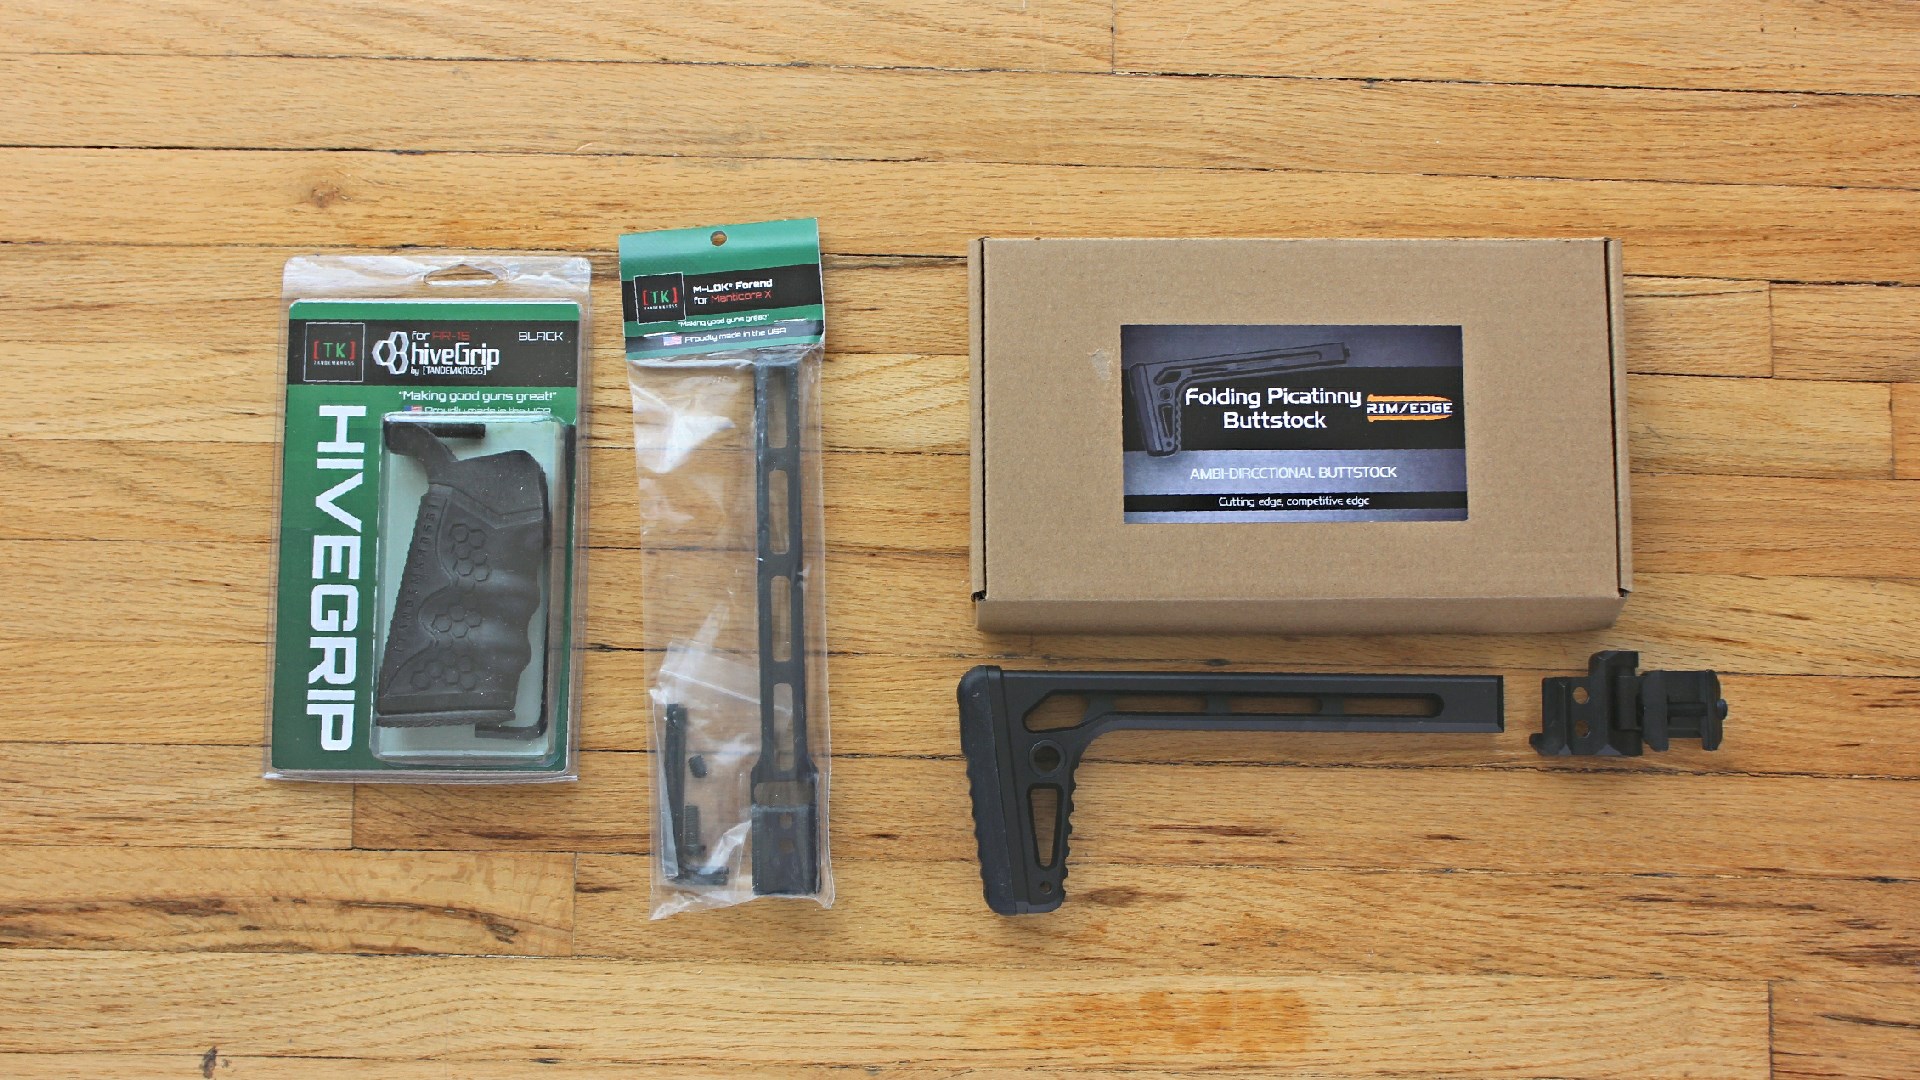 Tandemkross pro bundle parts set including grip stock box packages on wood floor